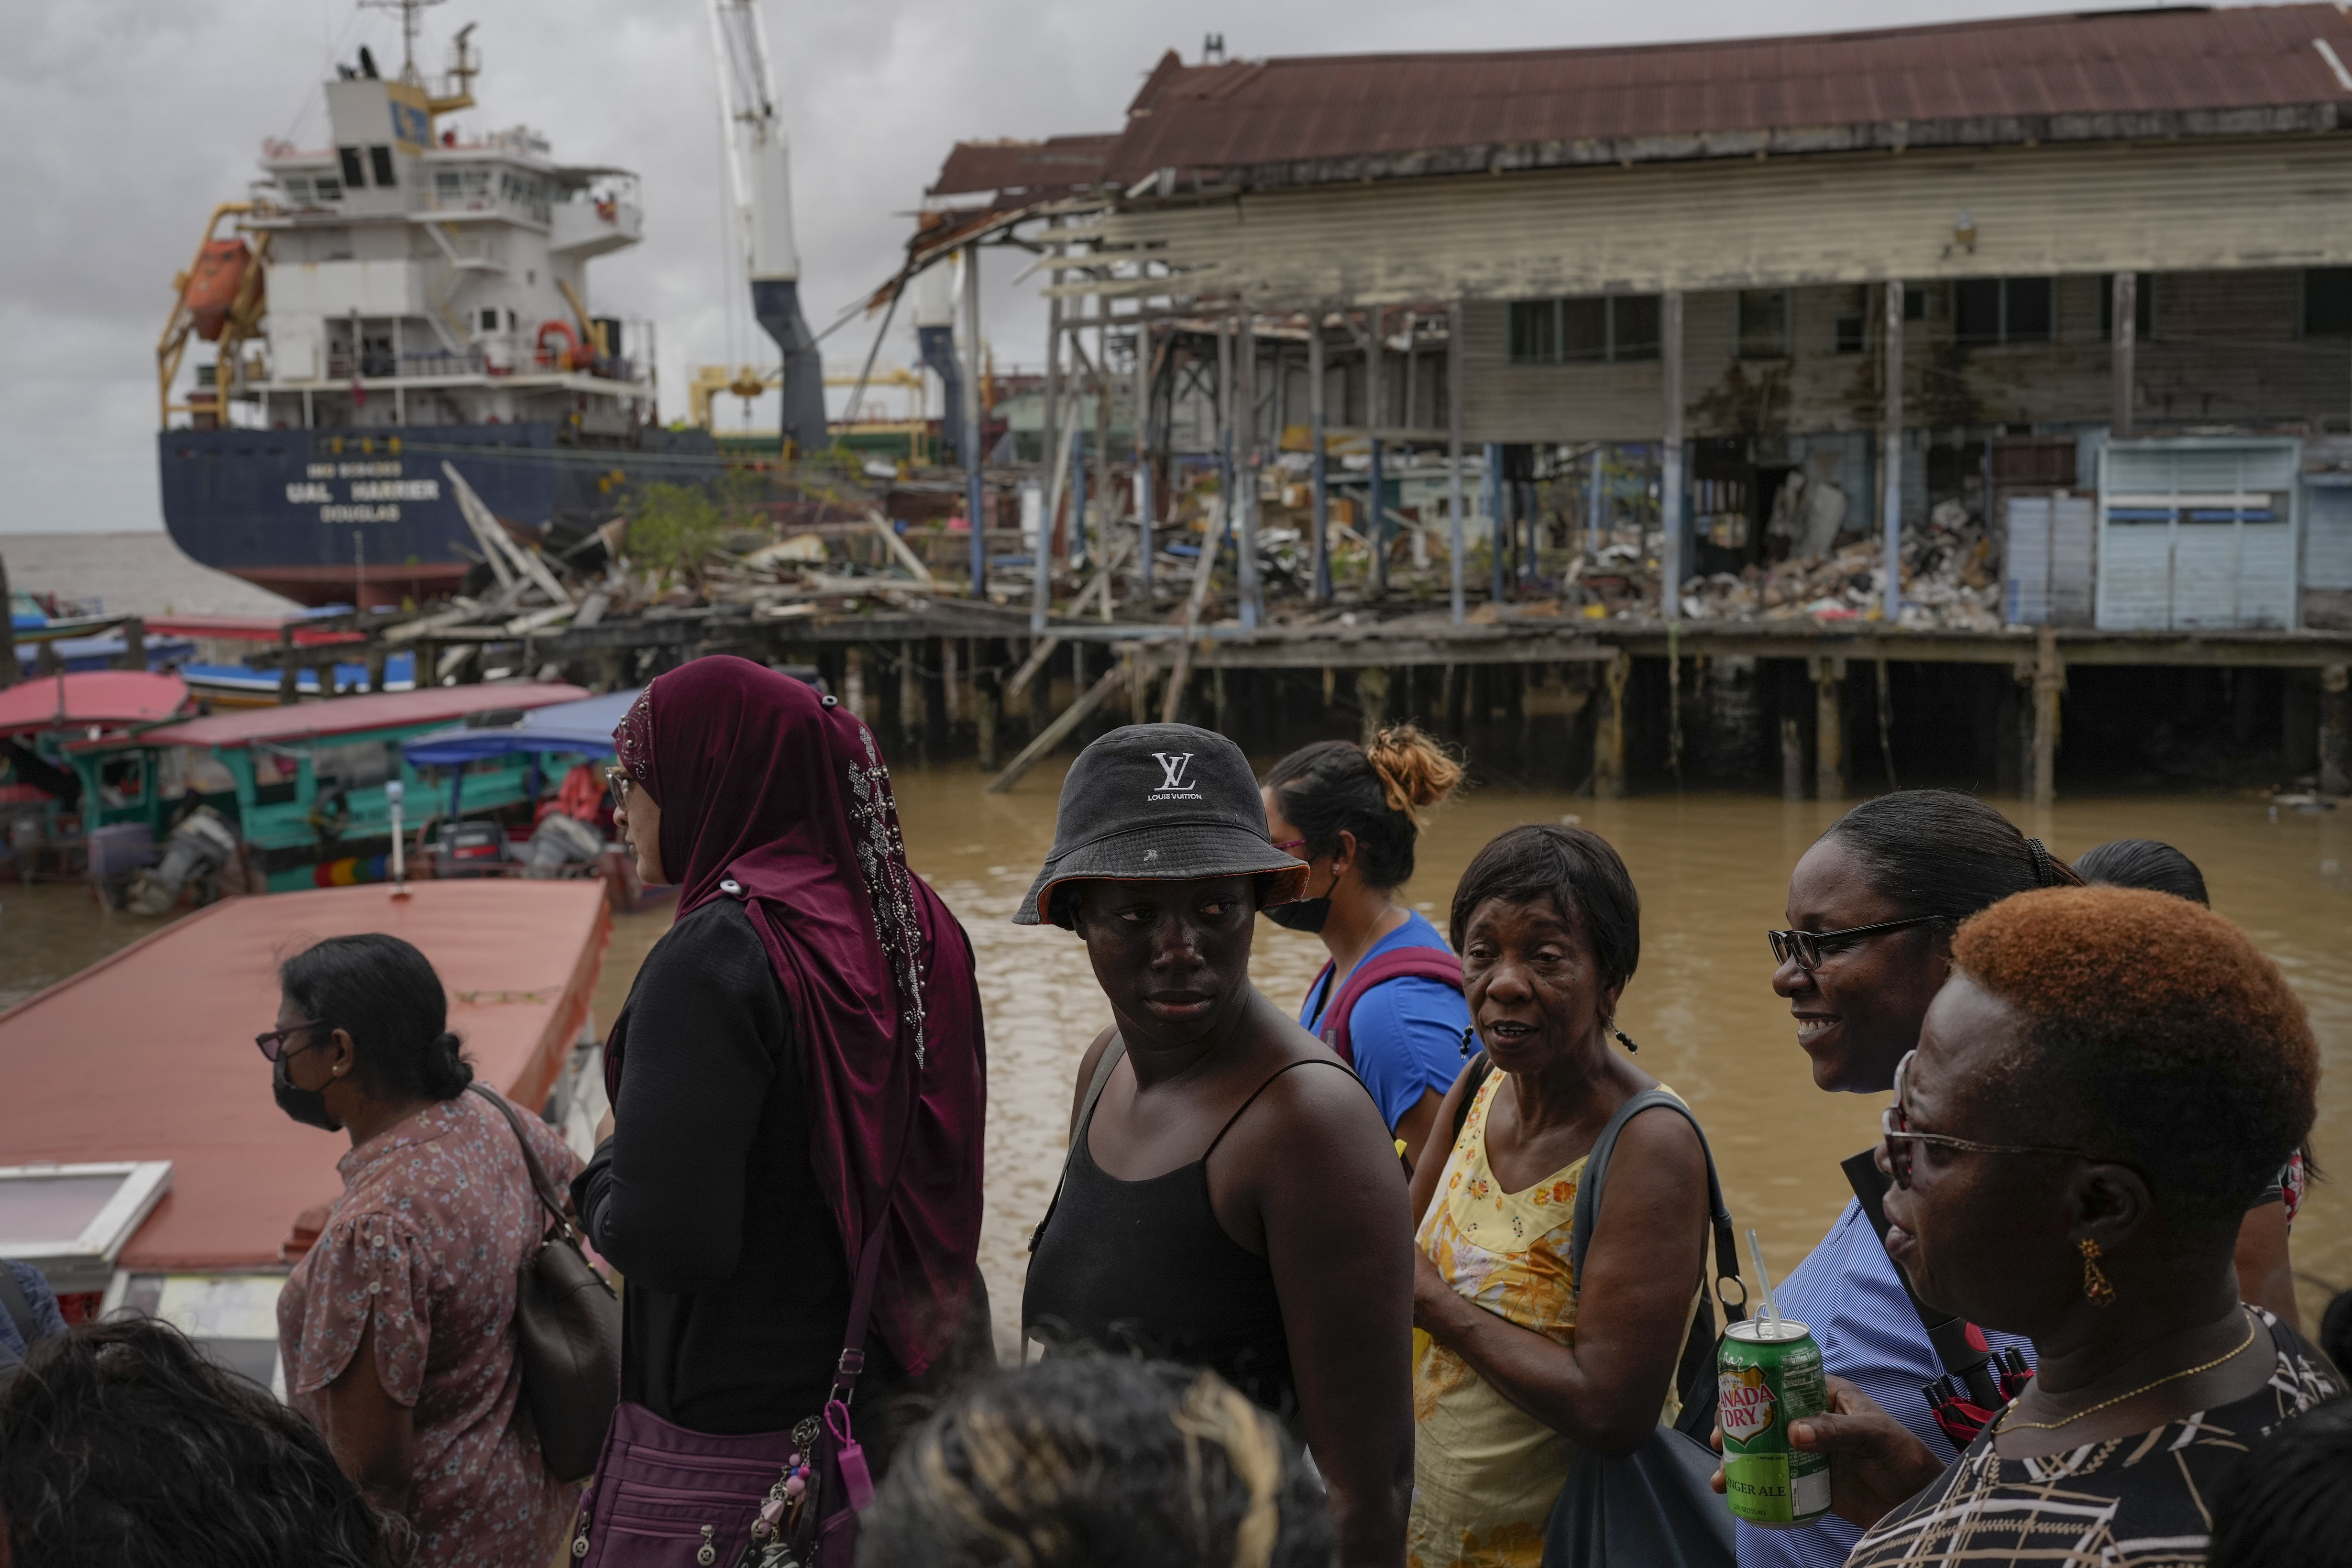 A group of people wait at the Stabroek market to cross to the other side of the Demerara River, near a merchant ship, in Georgetown, Guyana, on April 12, 2023. Guyana is on track to become the world's fourth largest oil producer in high seas, ahead of Qatar, the United States, Mexico and Norway.  (AP Photo/Matias Delacroix)